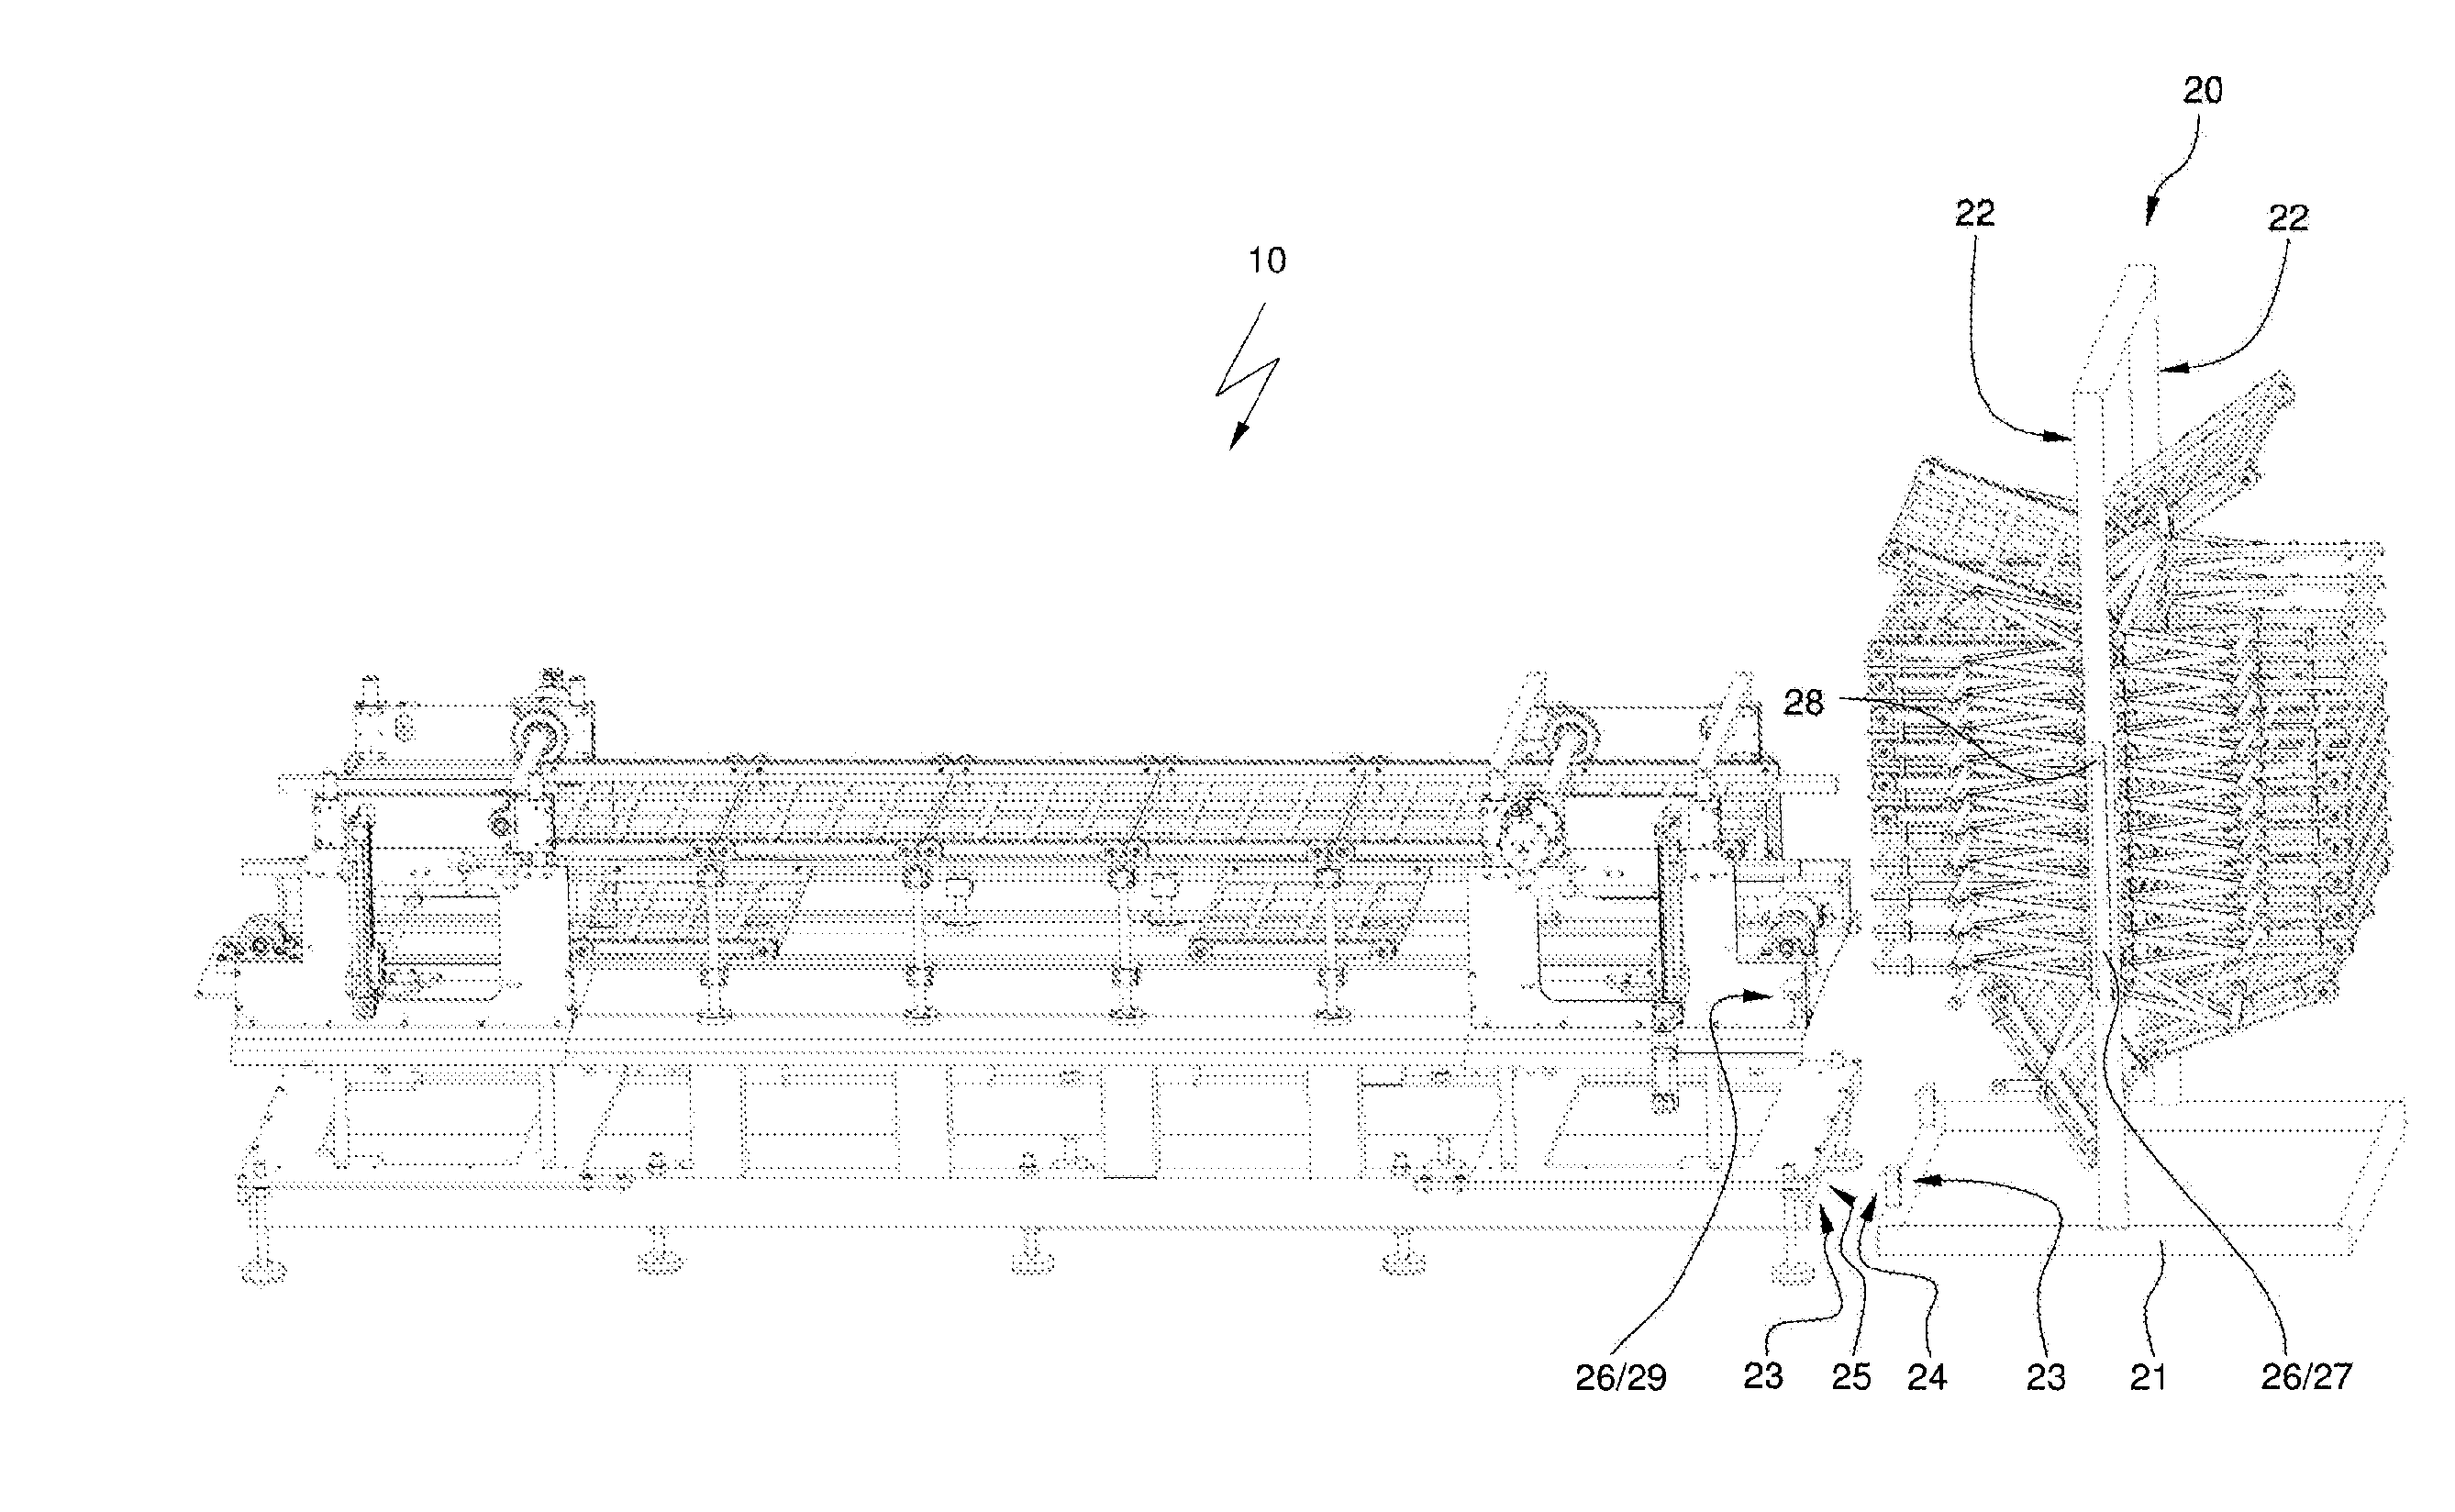 Device for filling containers with food products